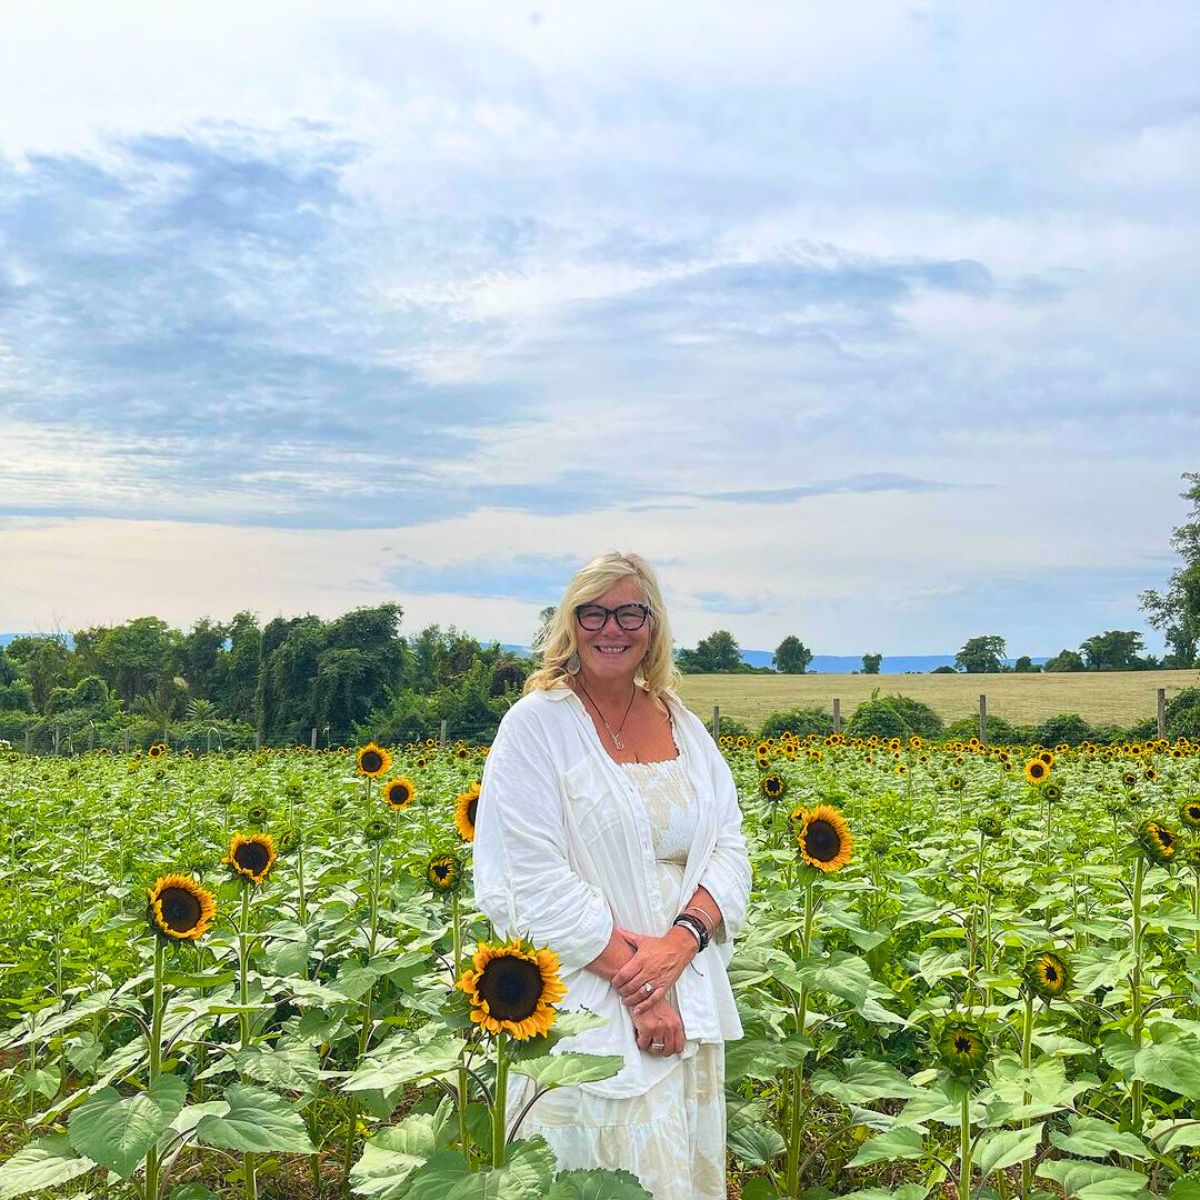 Holly Chapple surrounded by sunflowers in her farm